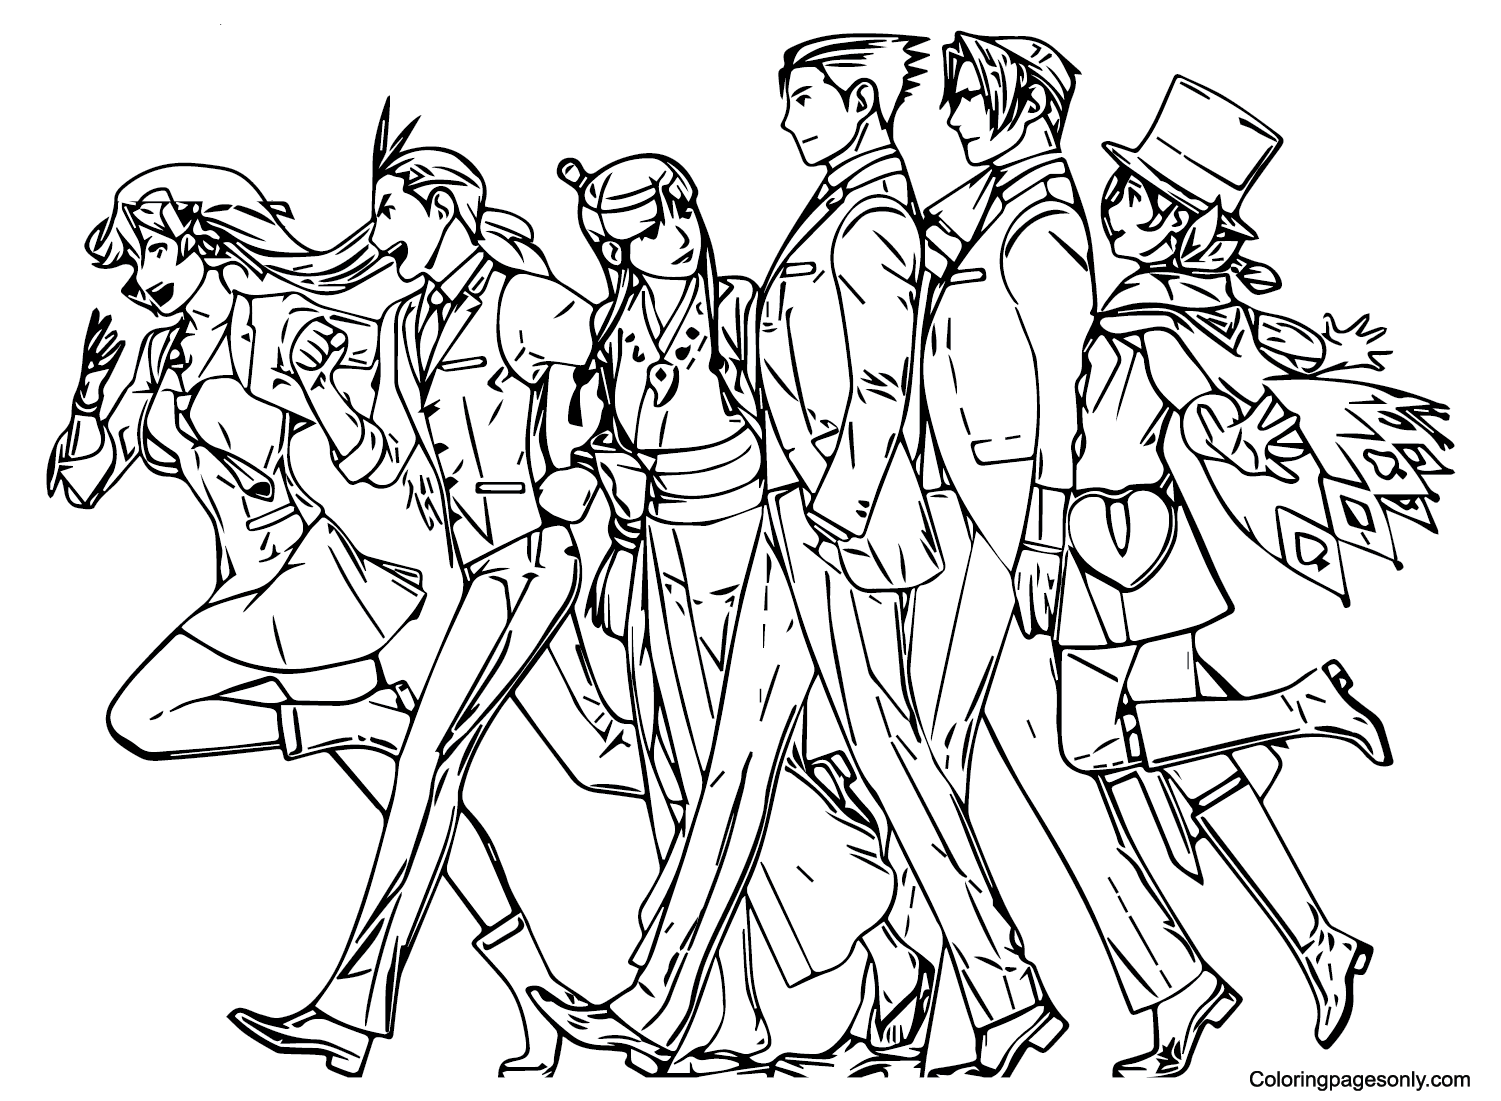 Personnages d'Ace Attorney d'Ace Attorney